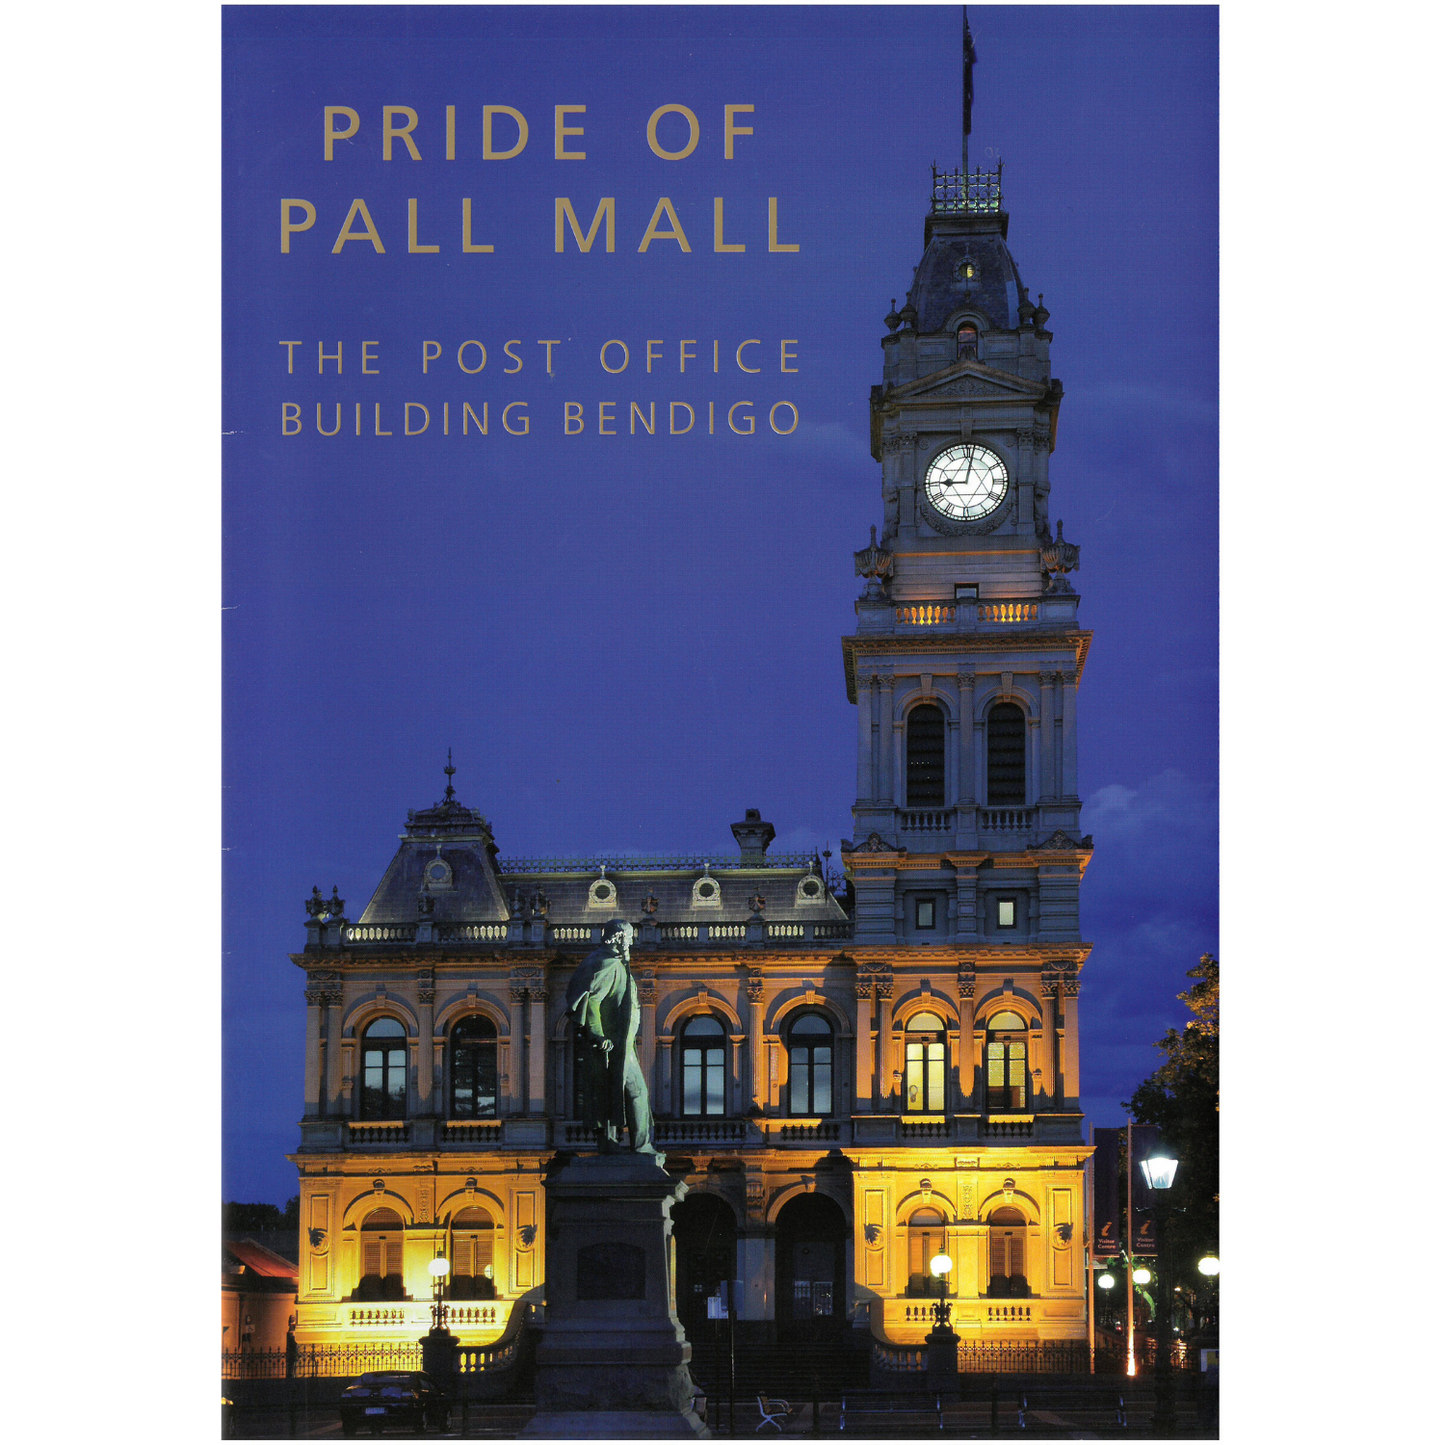 The Pride of Pall Mall